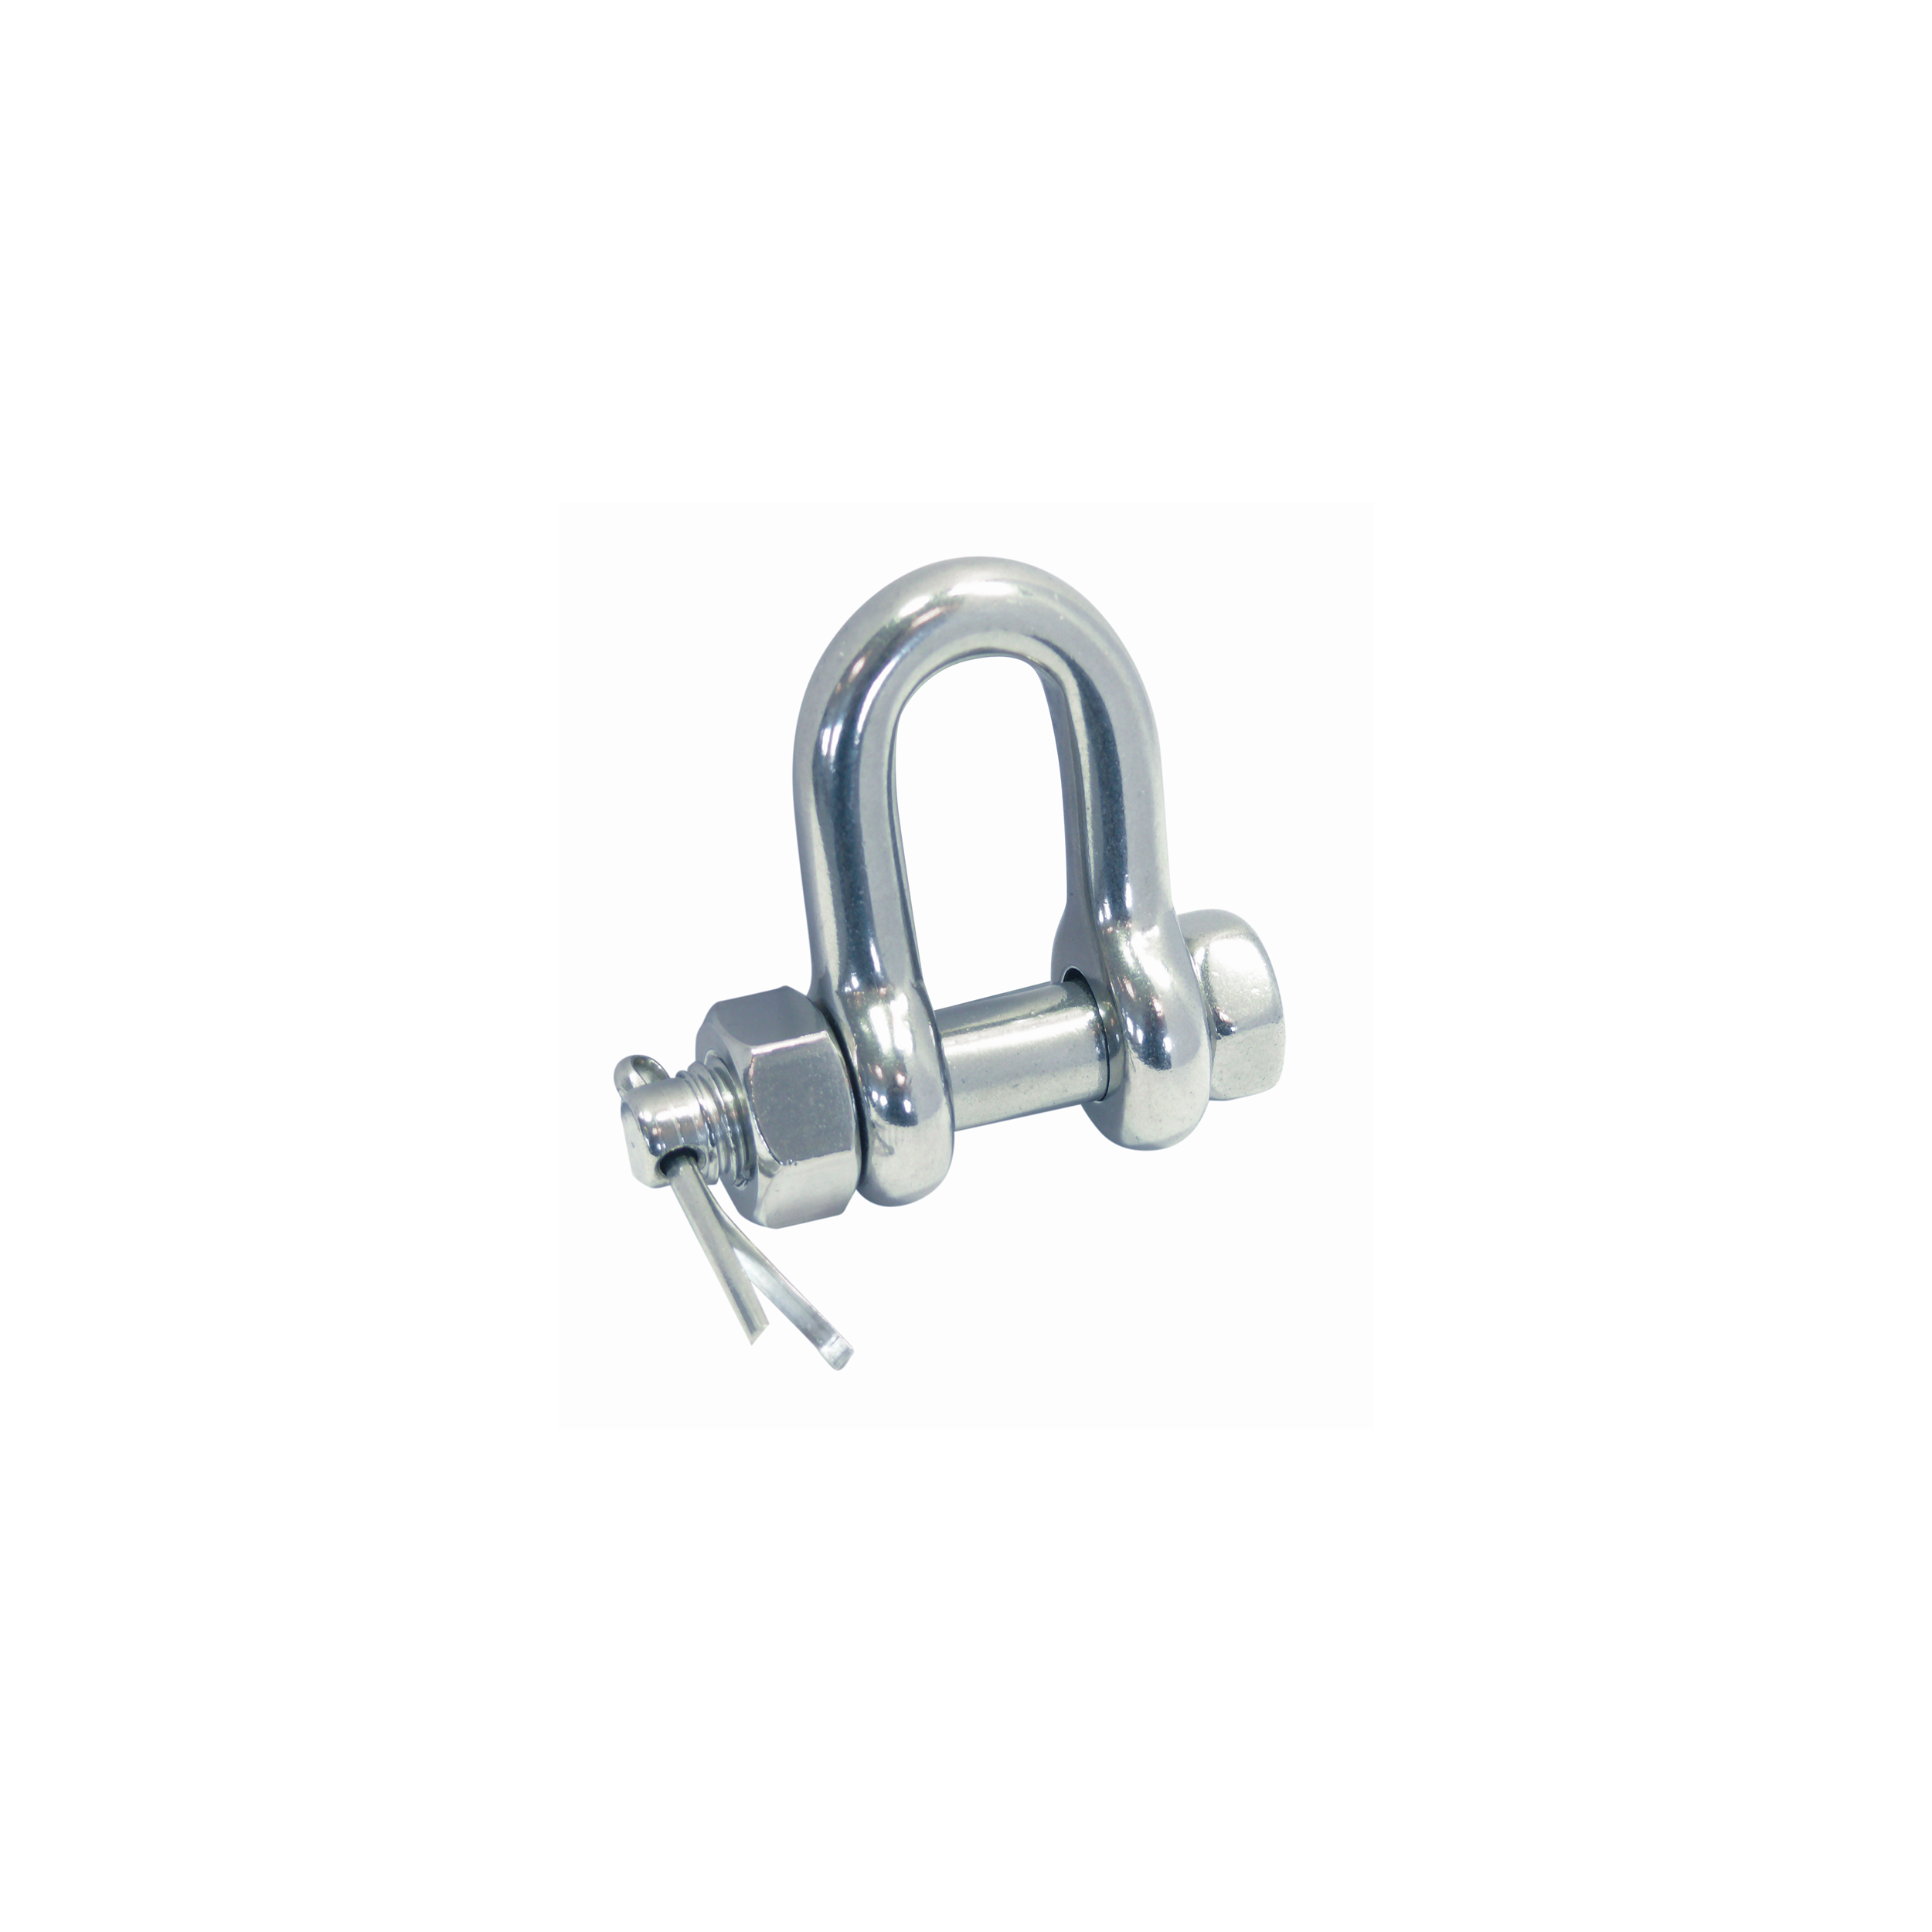 D-shackle with secure bolt A4  bolt 25mm, bow 22mm